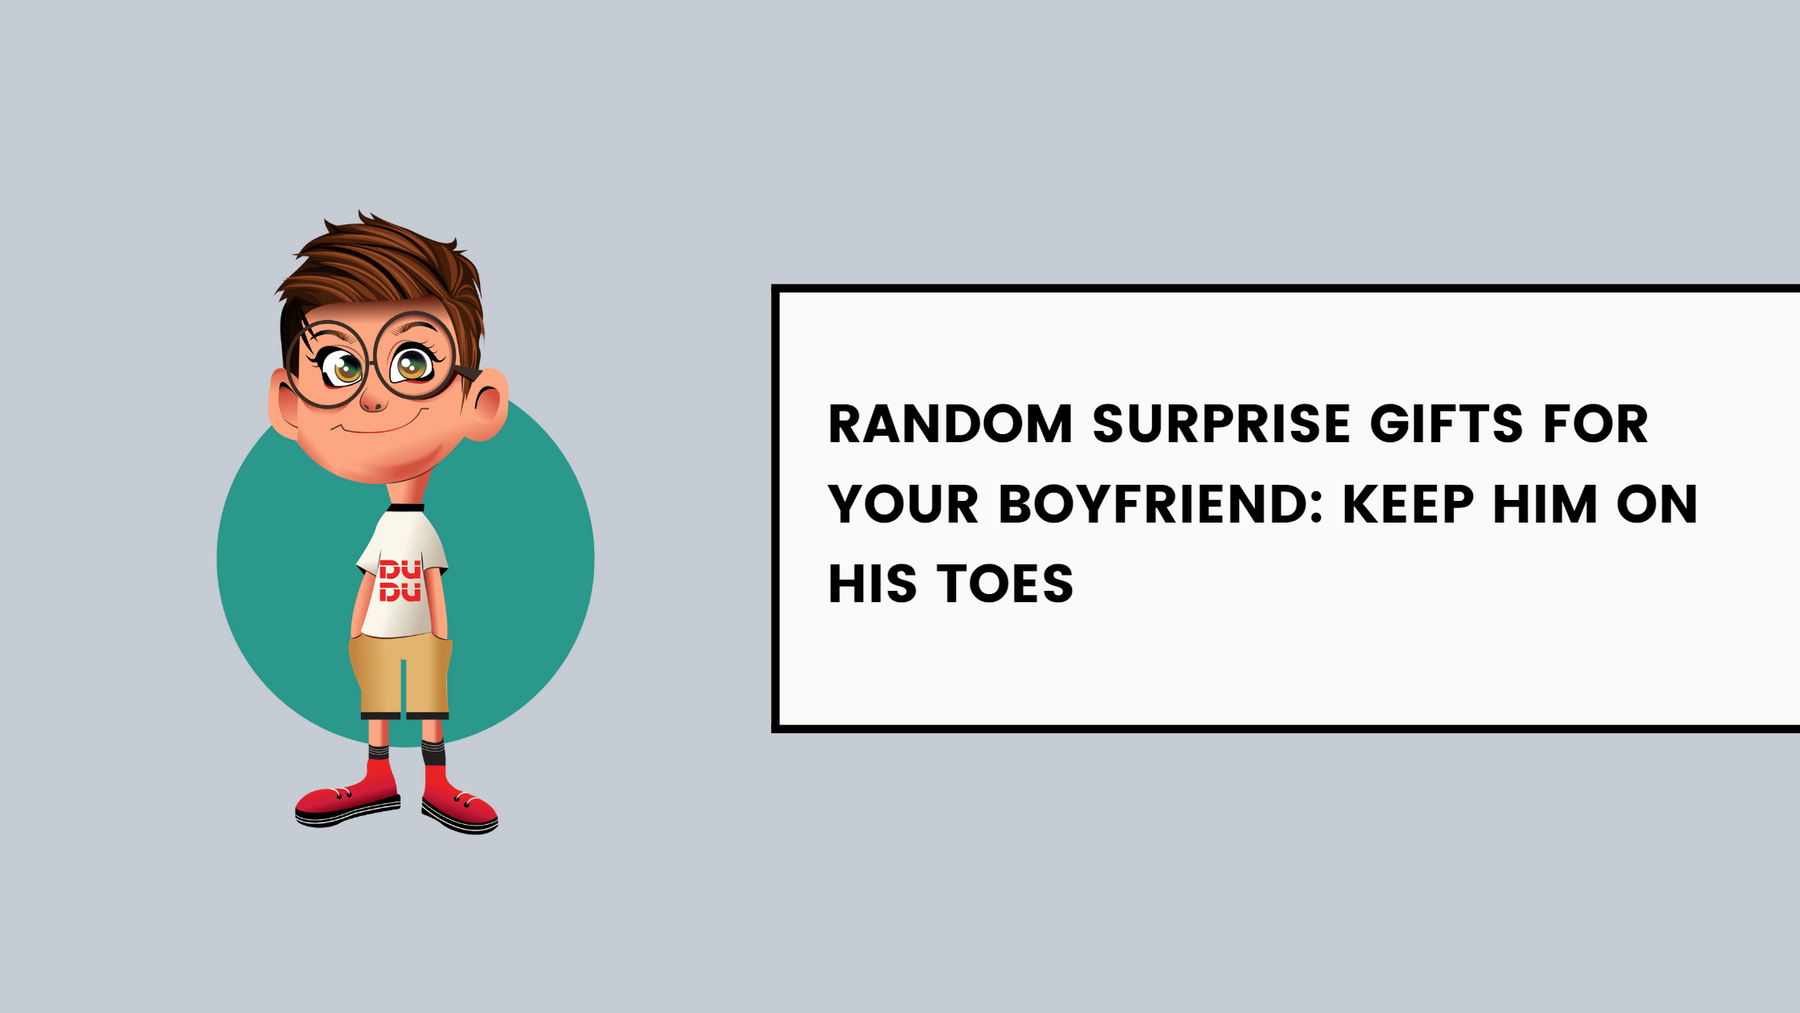 Random Surprise Gifts For Your Boyfriend: Keep Him On His Toes